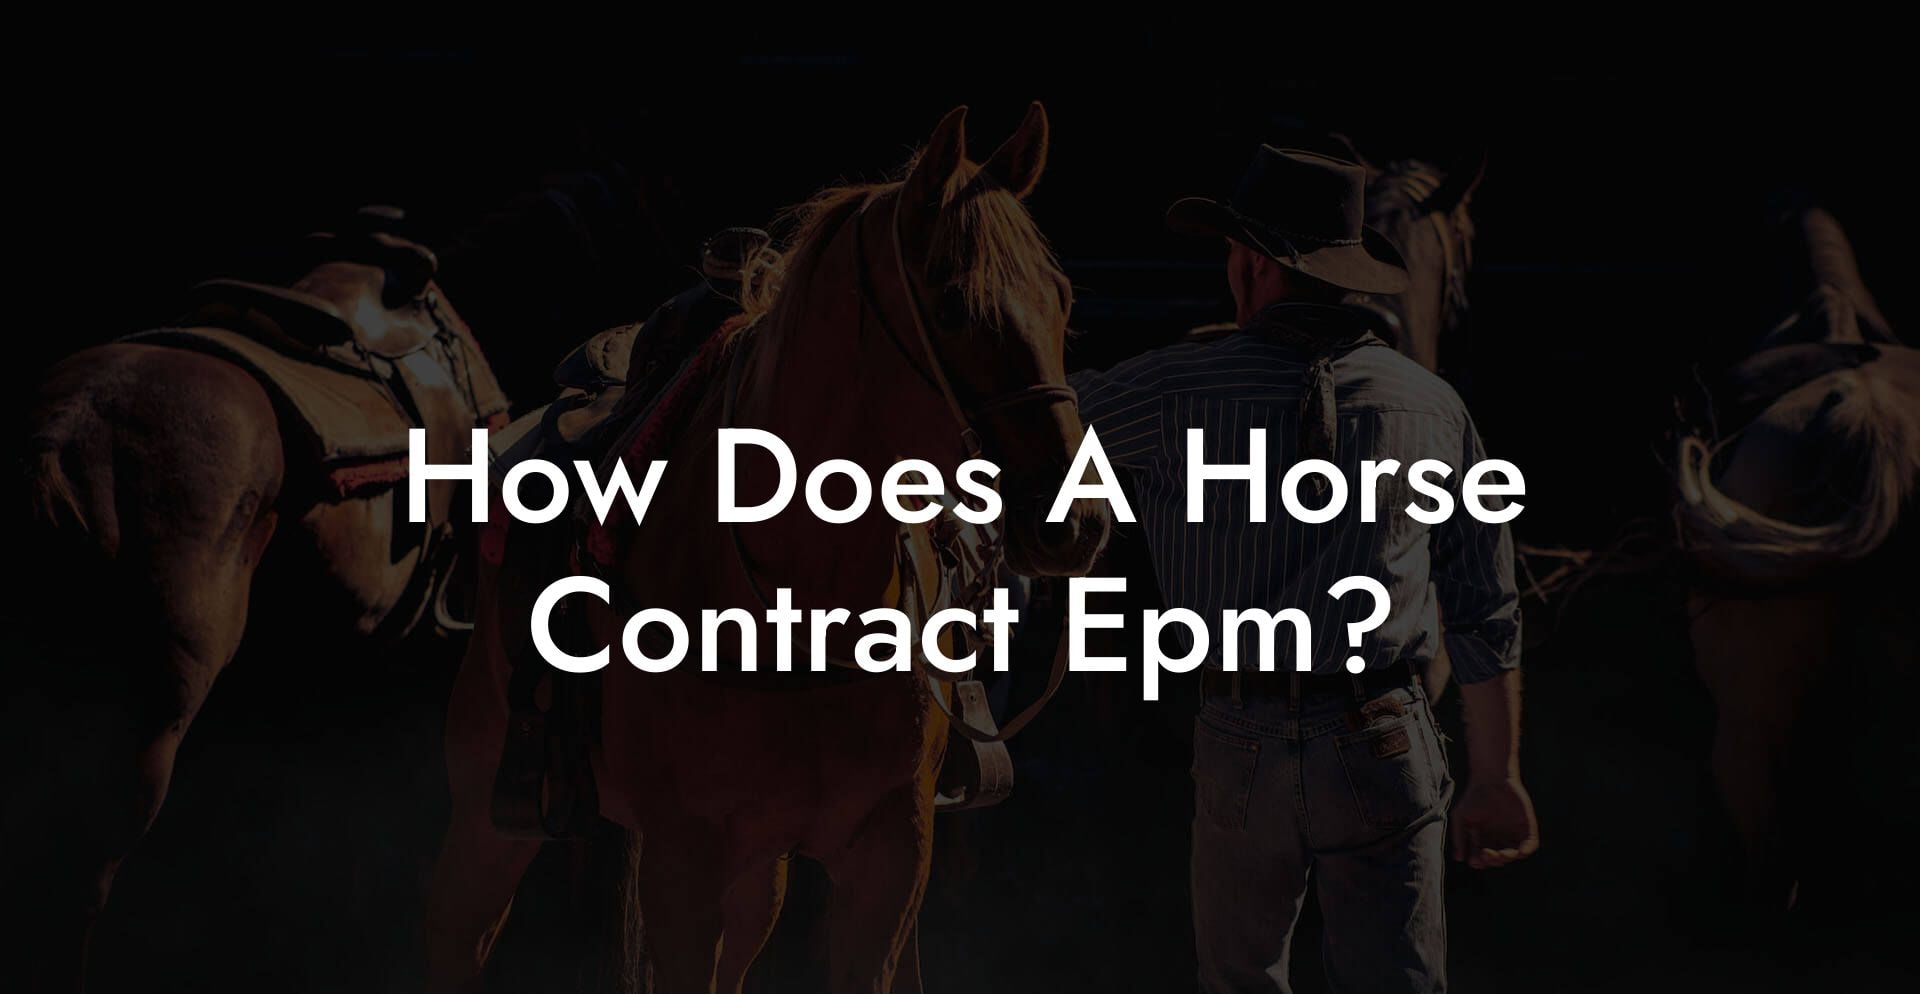 How Does A Horse Contract Epm?